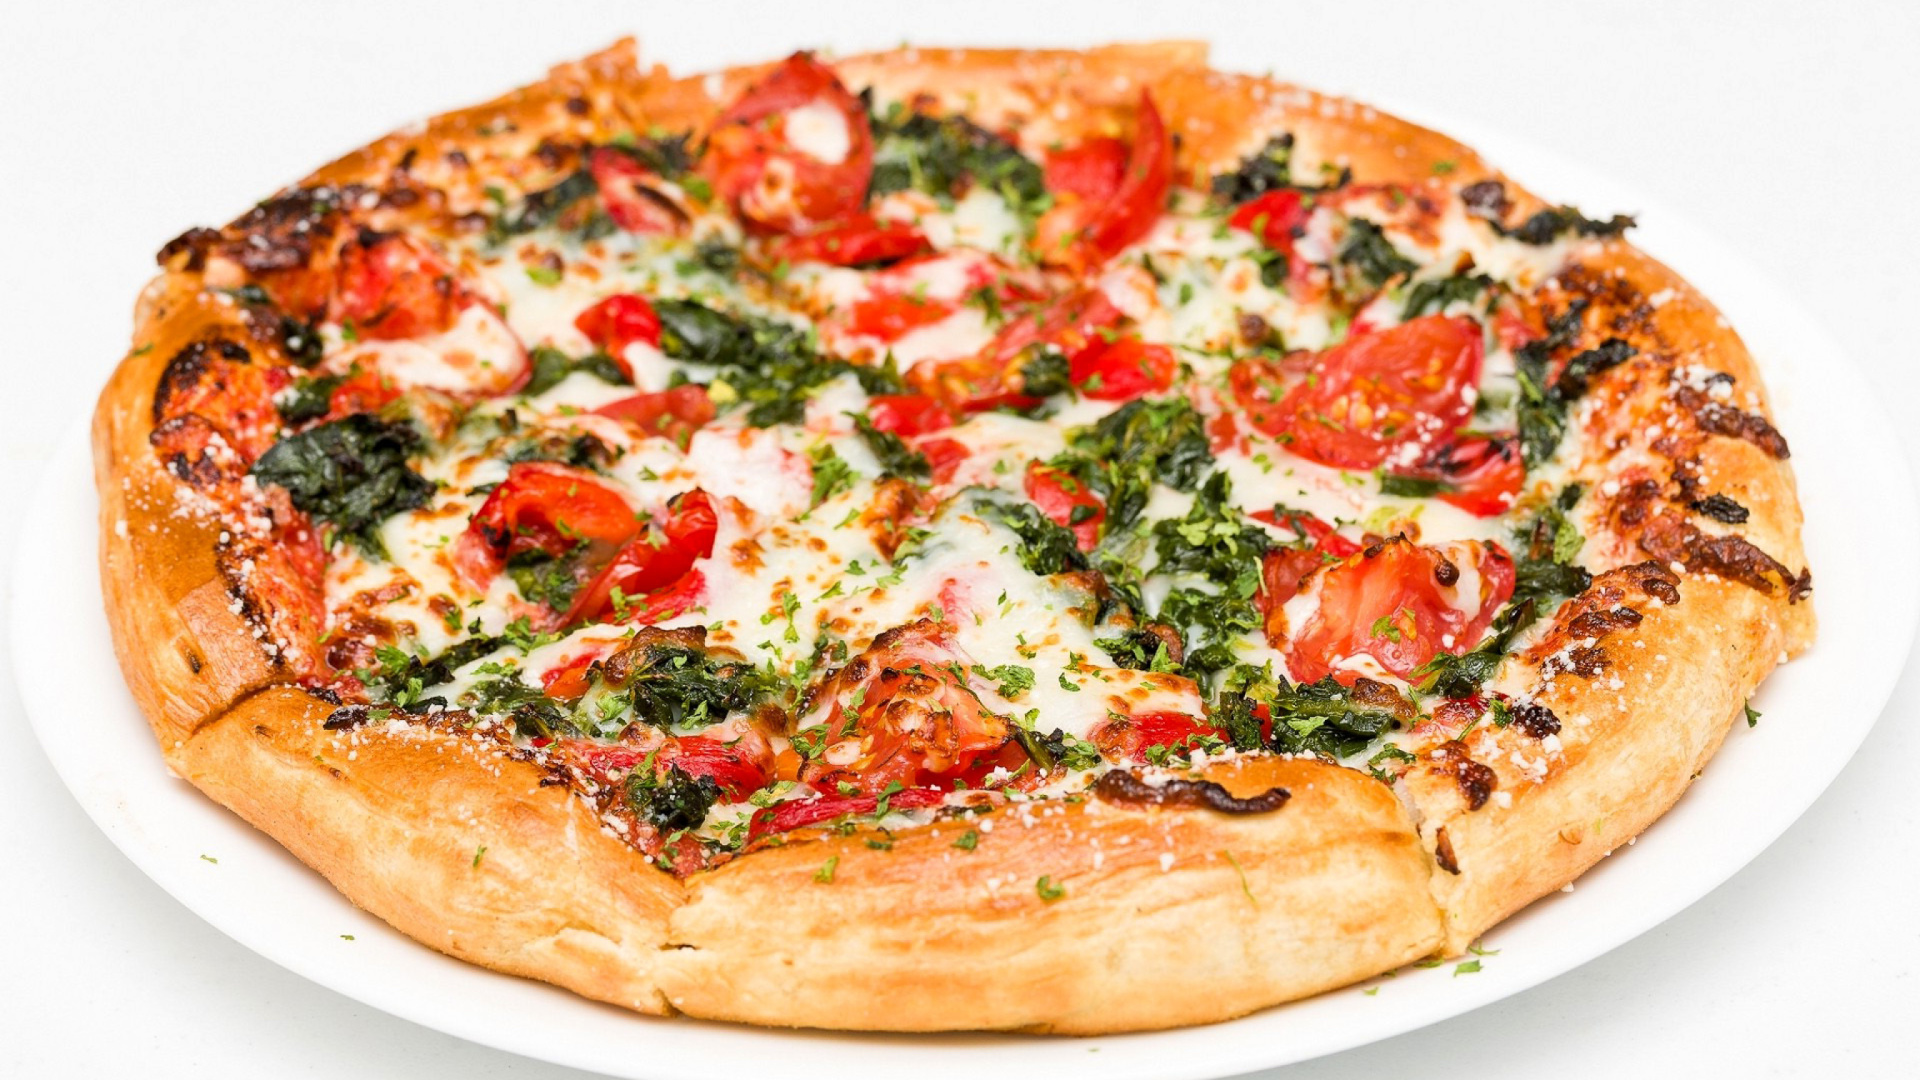 Das Pizza with spinach Wallpaper 1920x1080